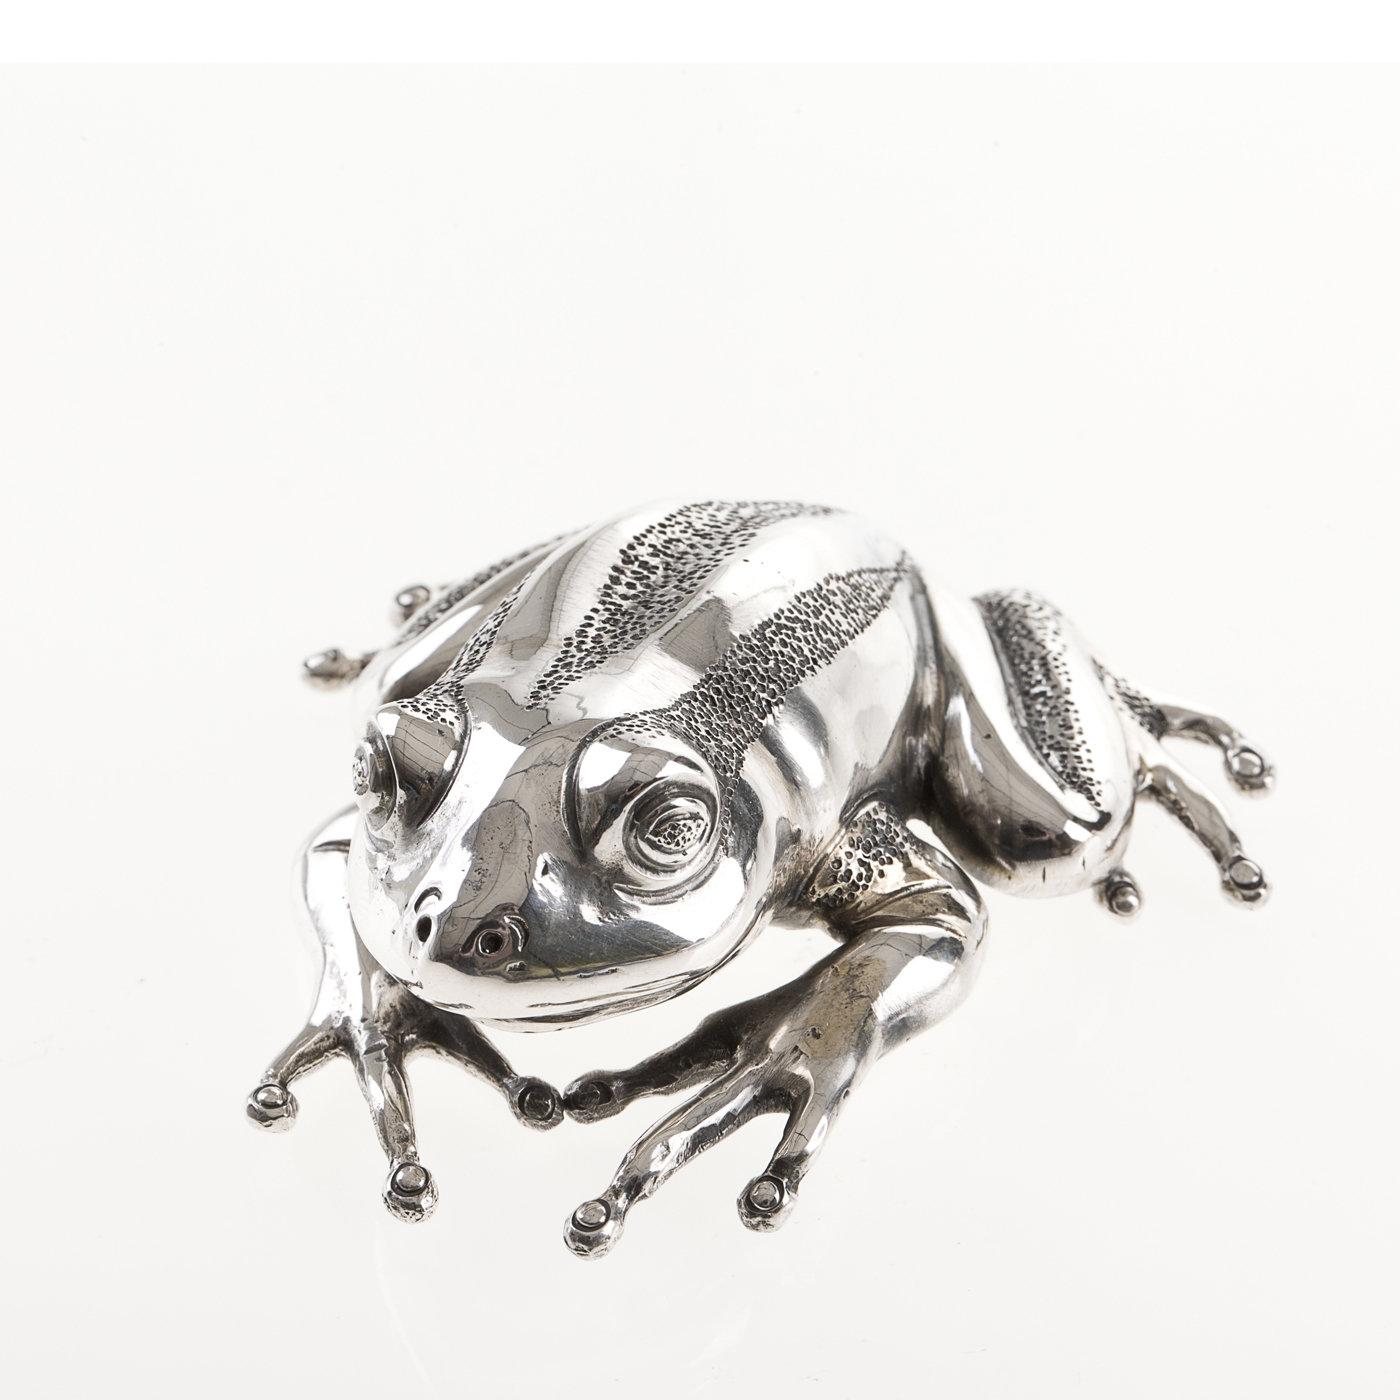 Intricate workmanship imbues this decorative piece with a life of its own. Crafted from sterling silver by Florentine silversmith house Lisi Brothers, this statuette is chiseled and engraved by hand, making the piece glisteningly vital.